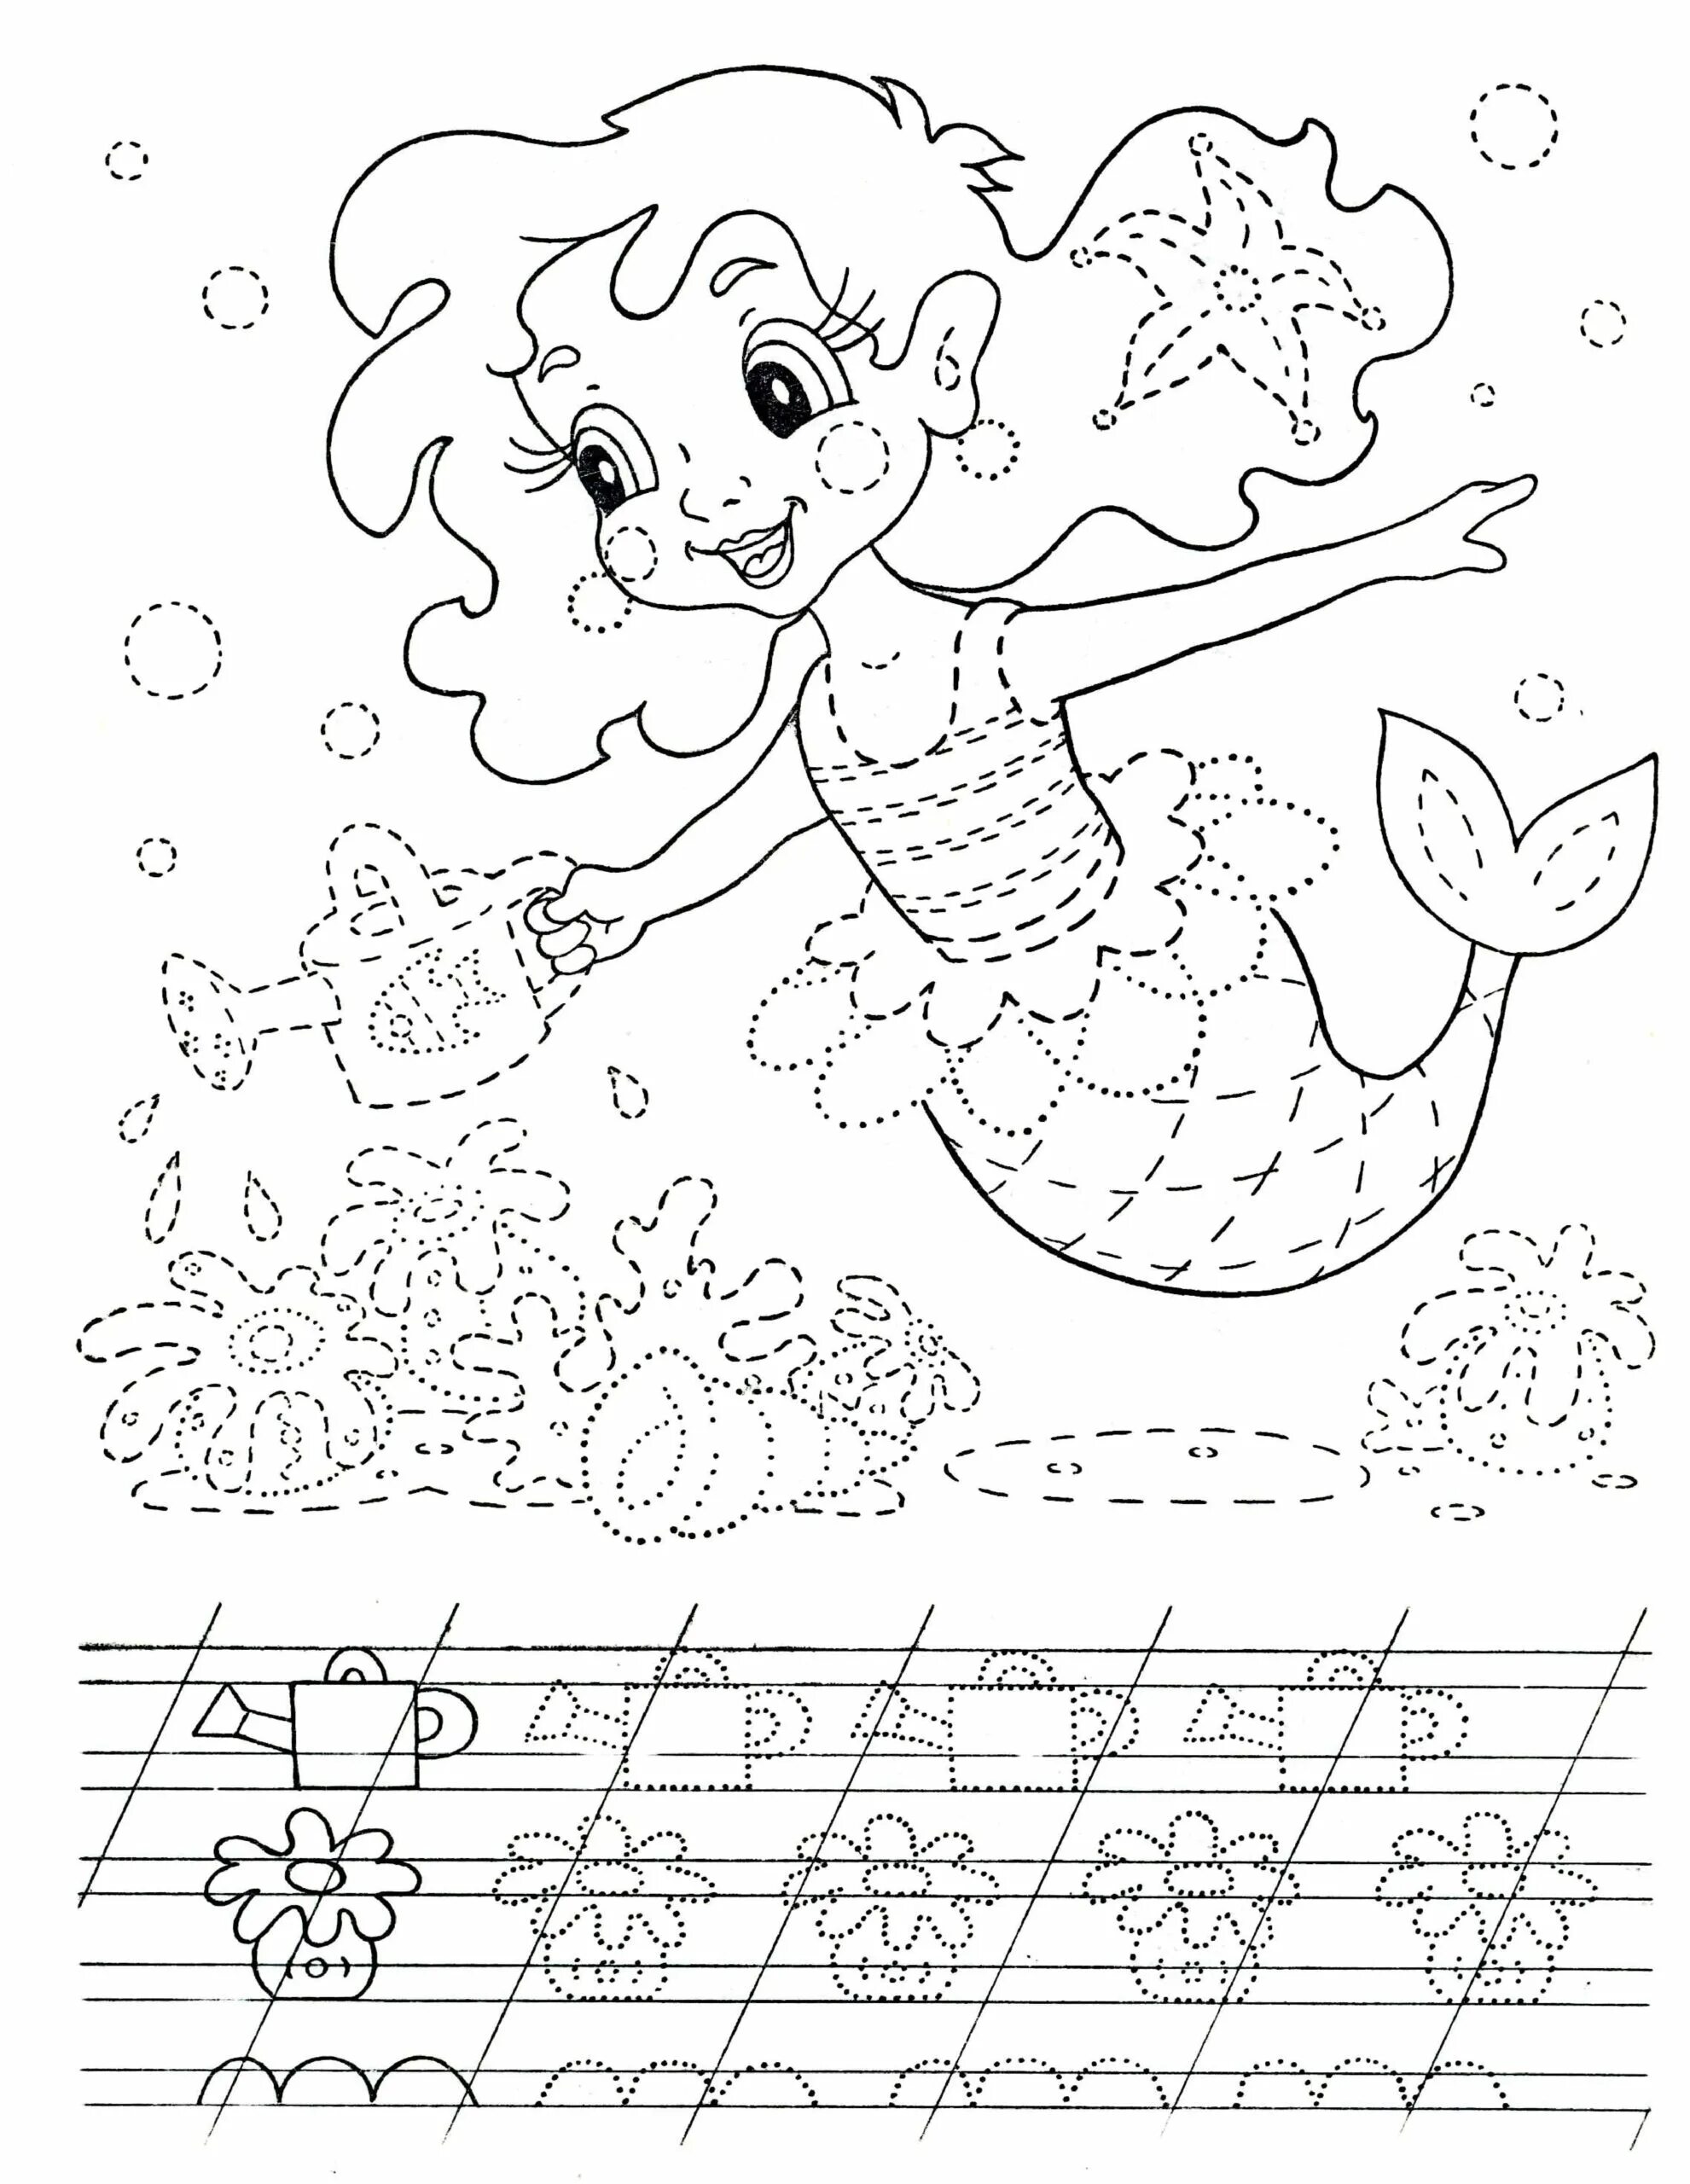 Creative educational coloring book for 5-6 year old girls